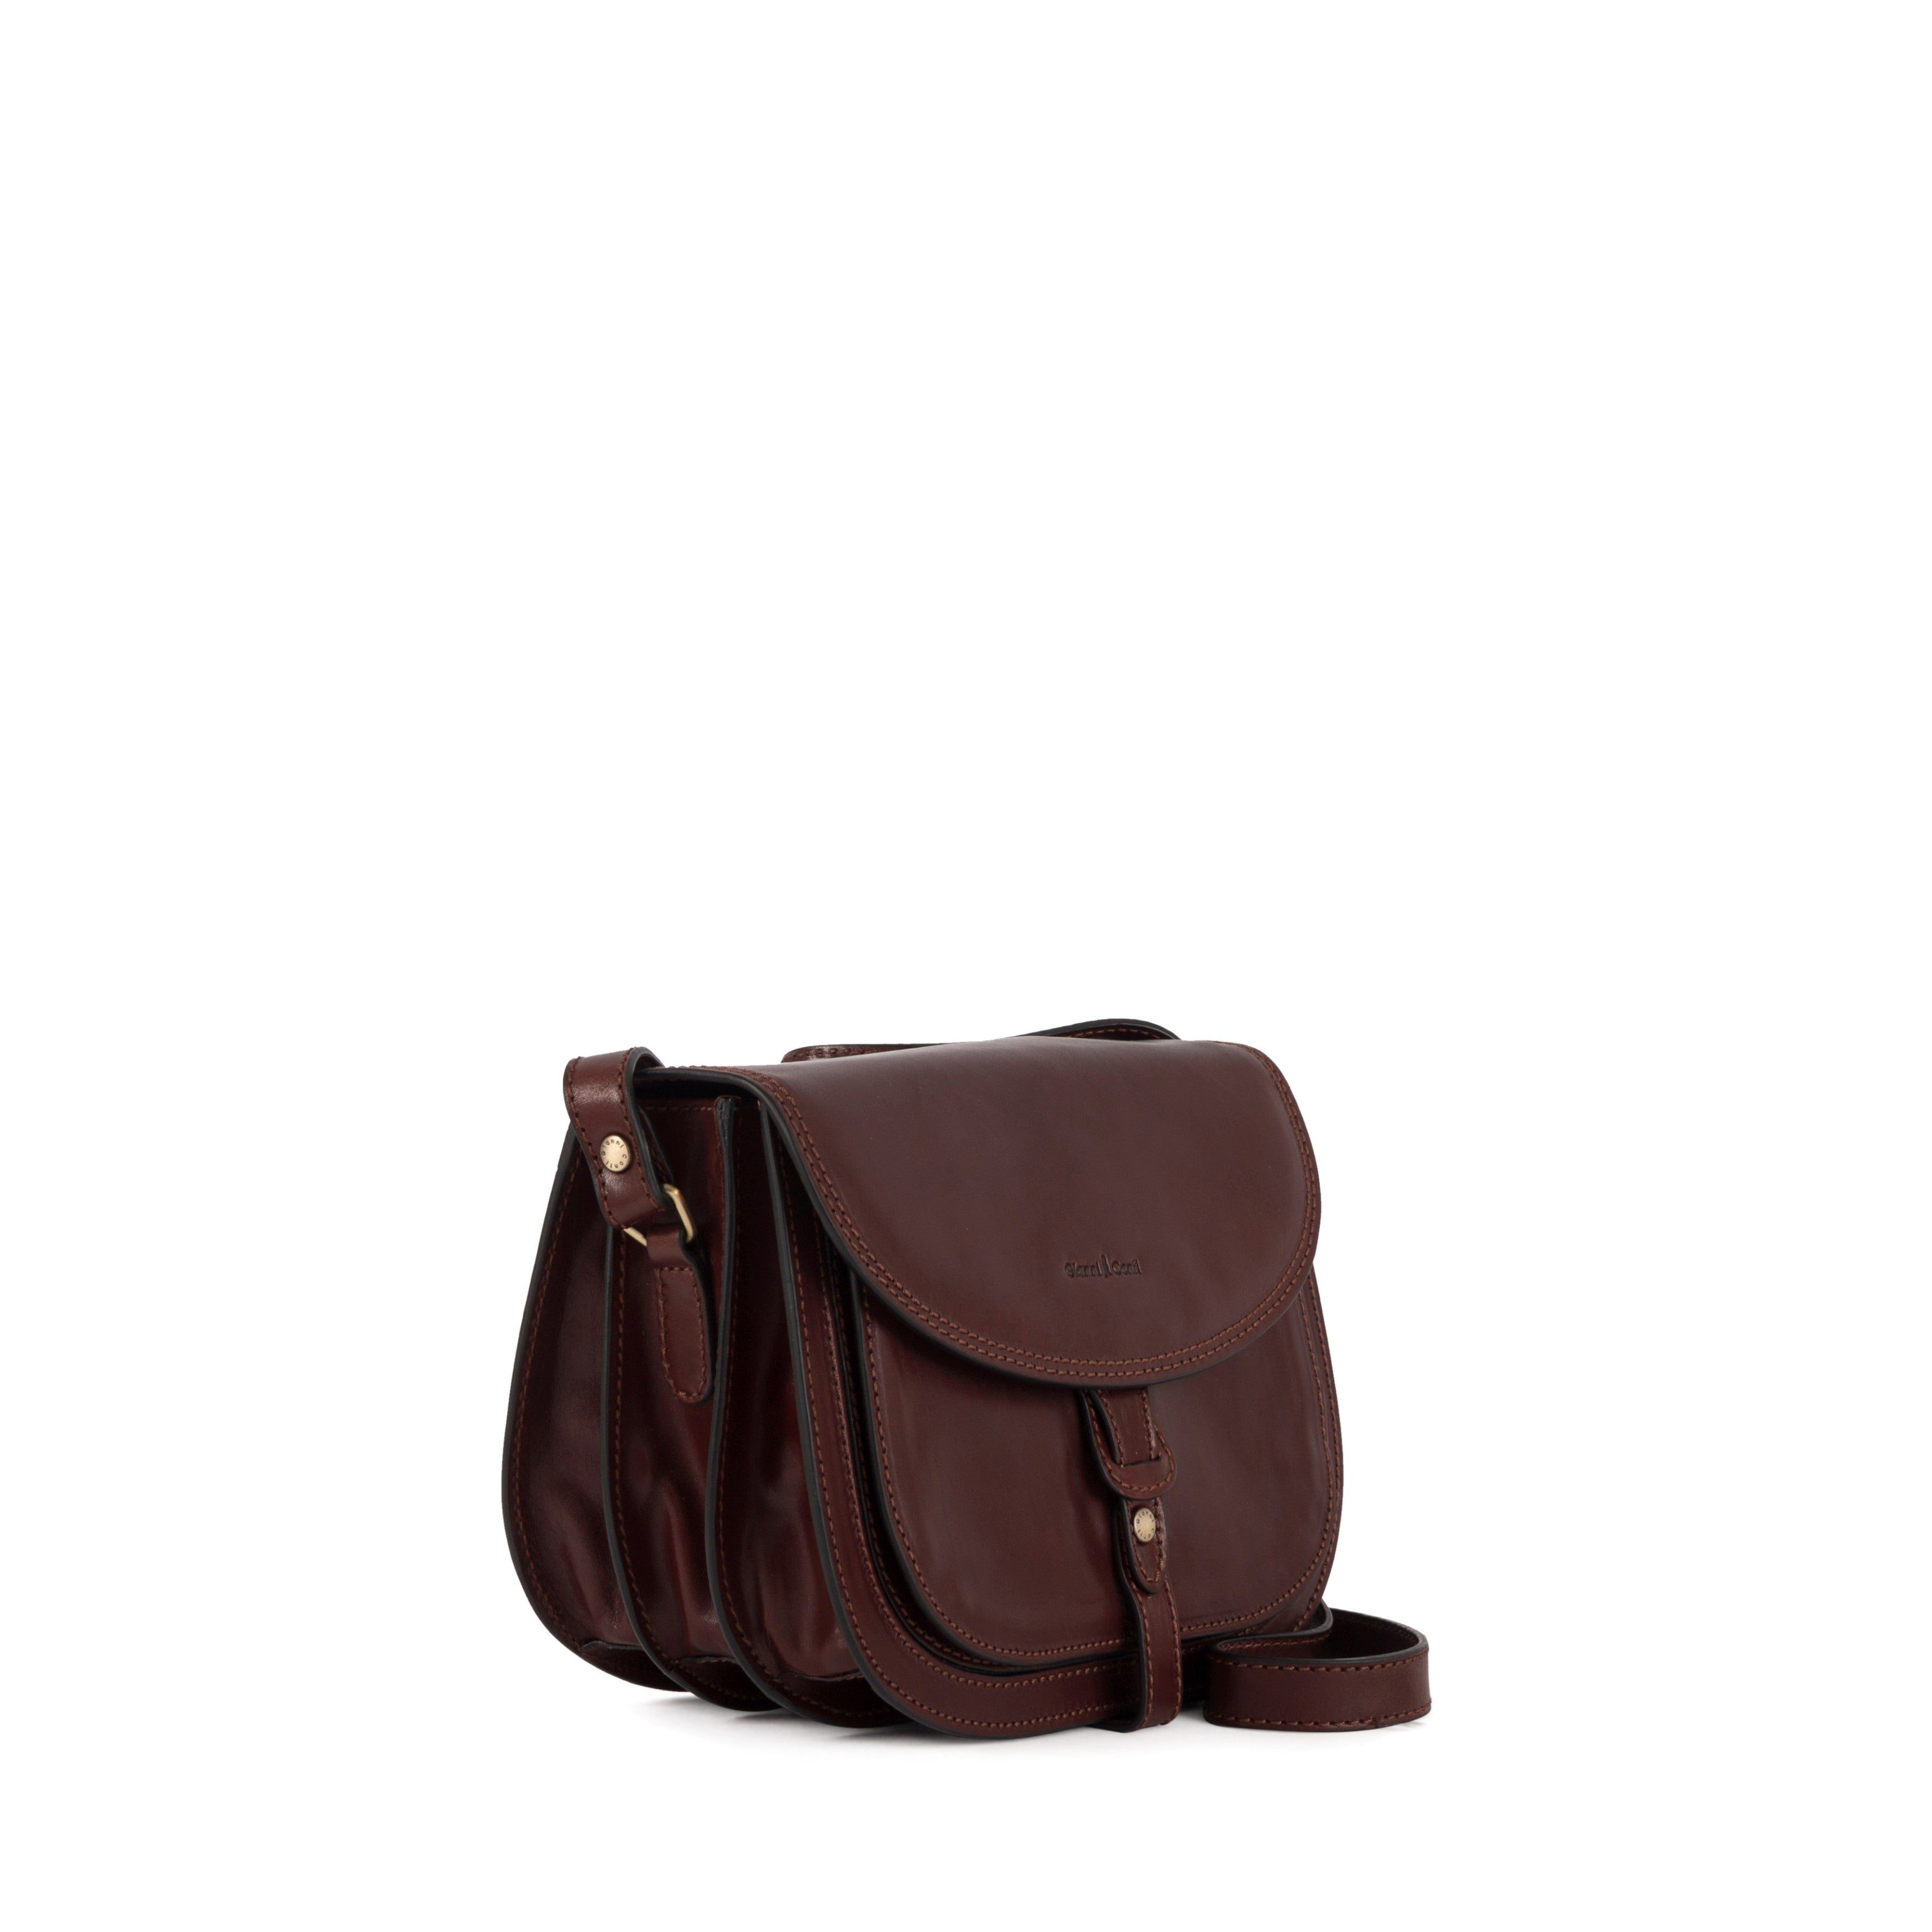 Gianni Conti Sybille Crossbody Bag - Vegetable-Tanned Leather